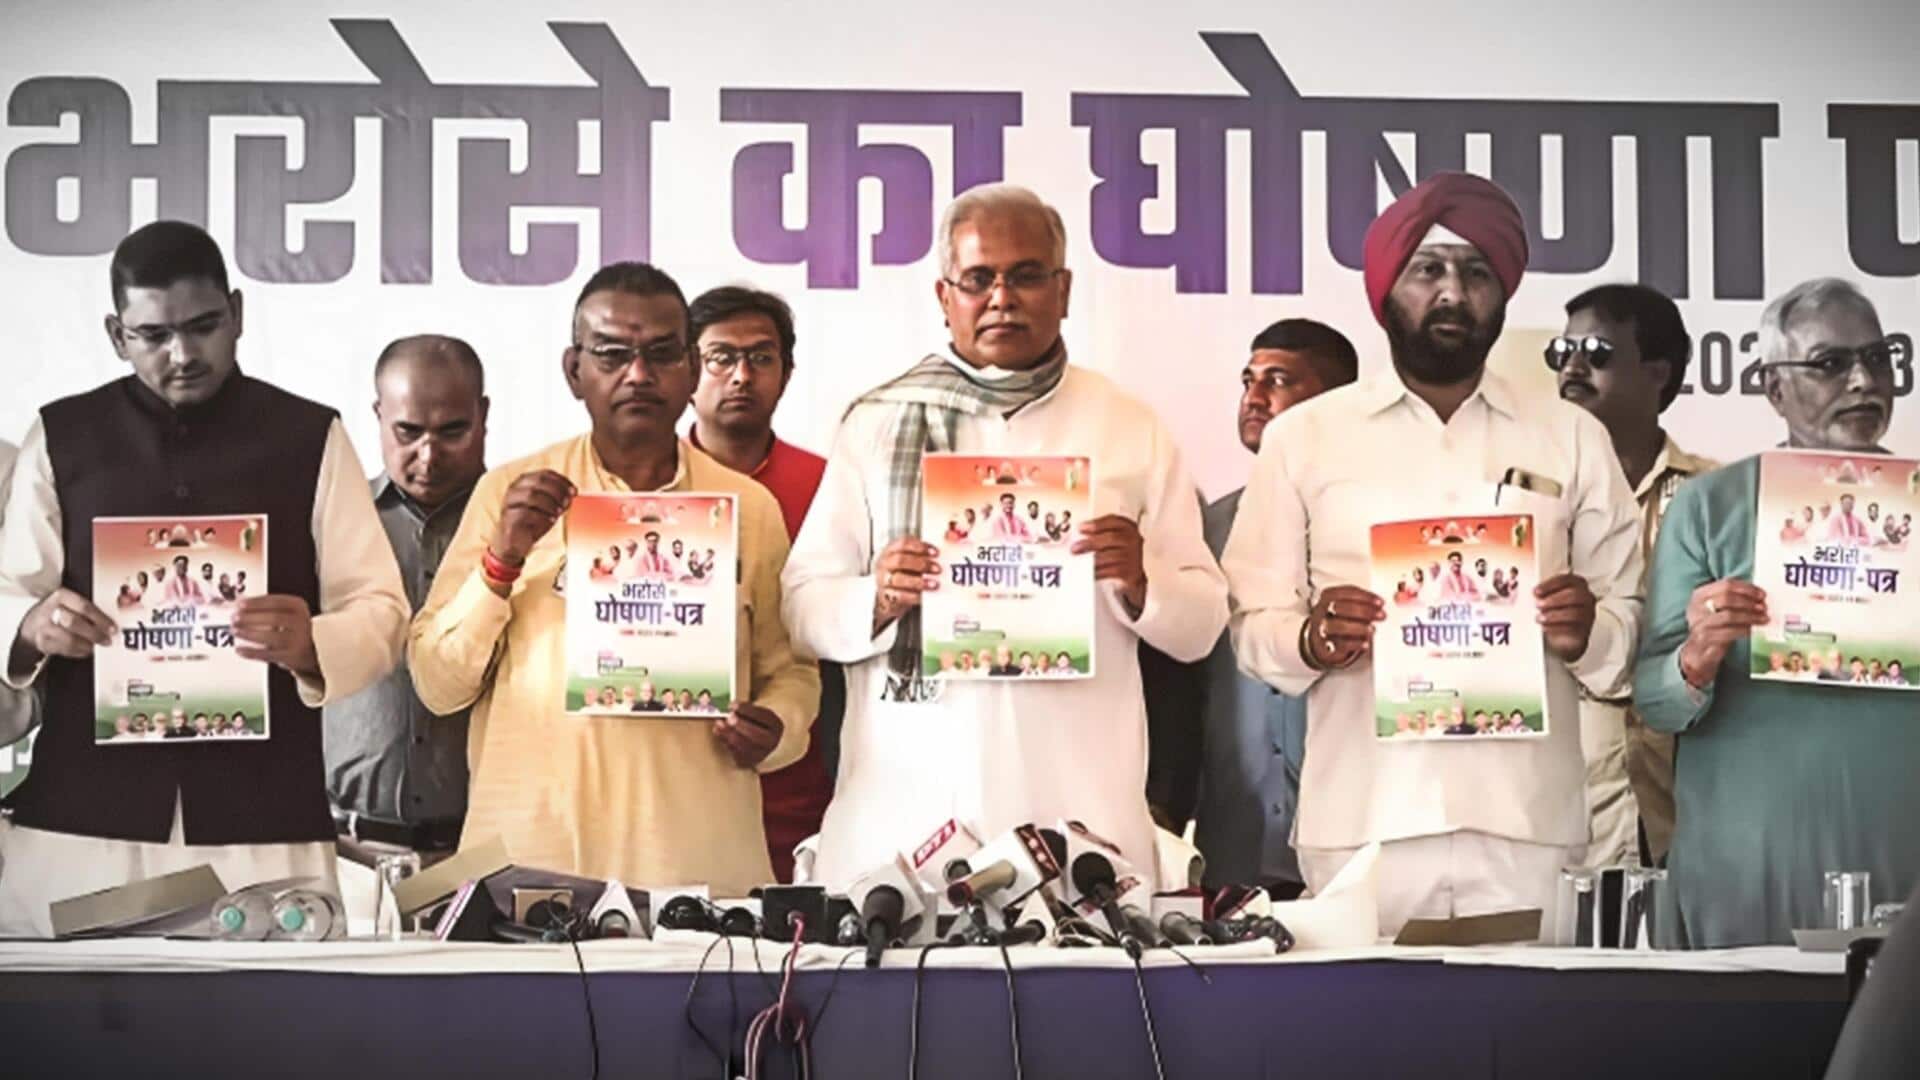 Cylinder subsidy, caste census: Congress's manifesto for Chhattisgarh assembly election